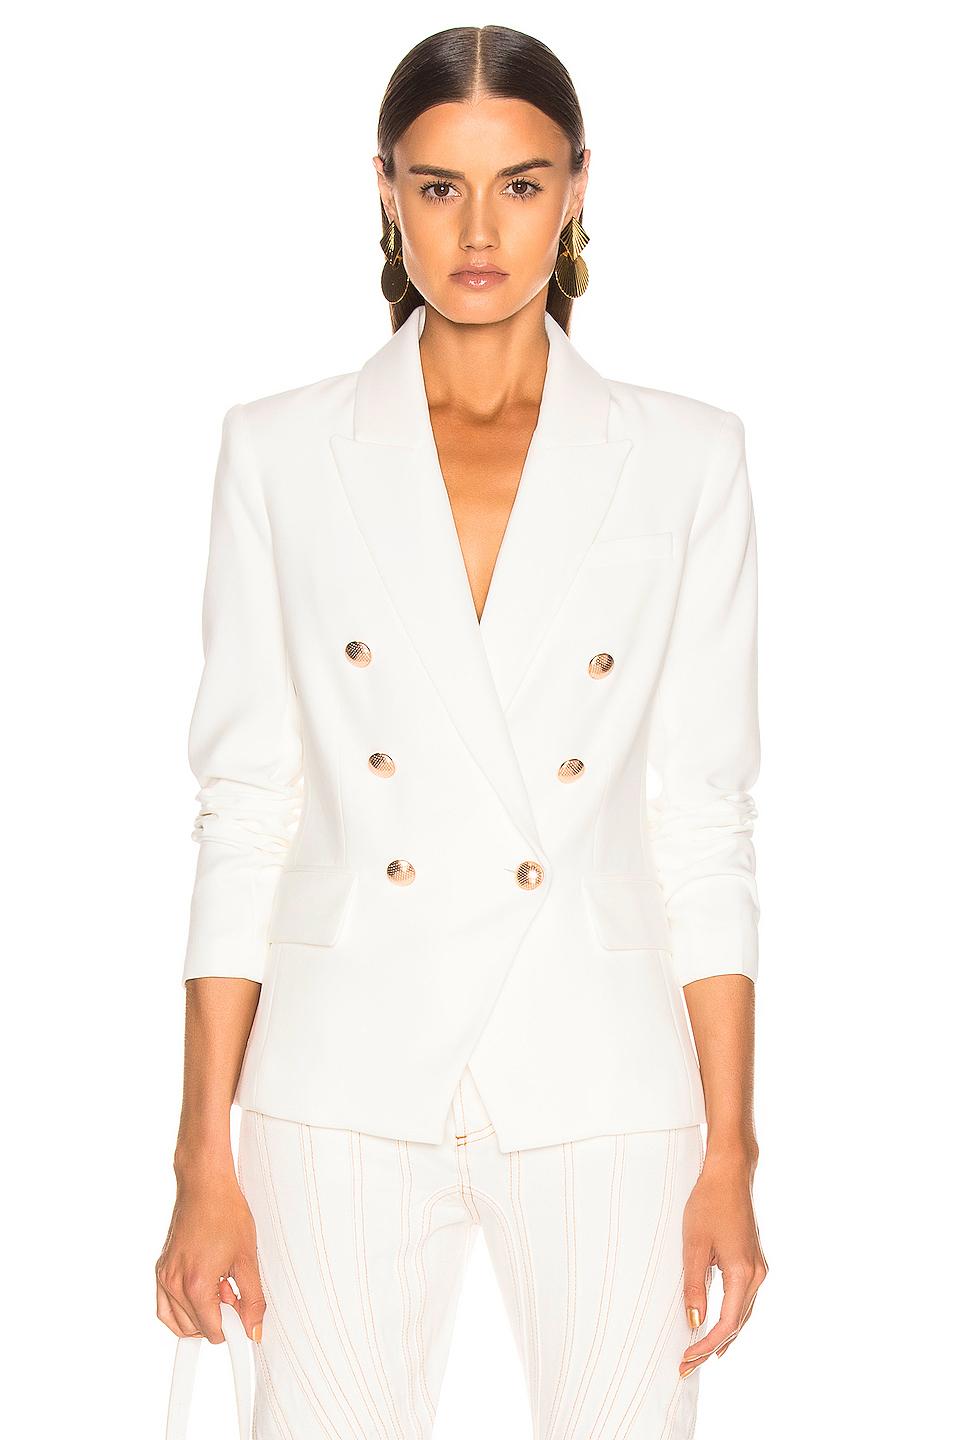 L'Agence Synthetic Kenzie Double Breasted Blazer in Ivory (White) - Lyst